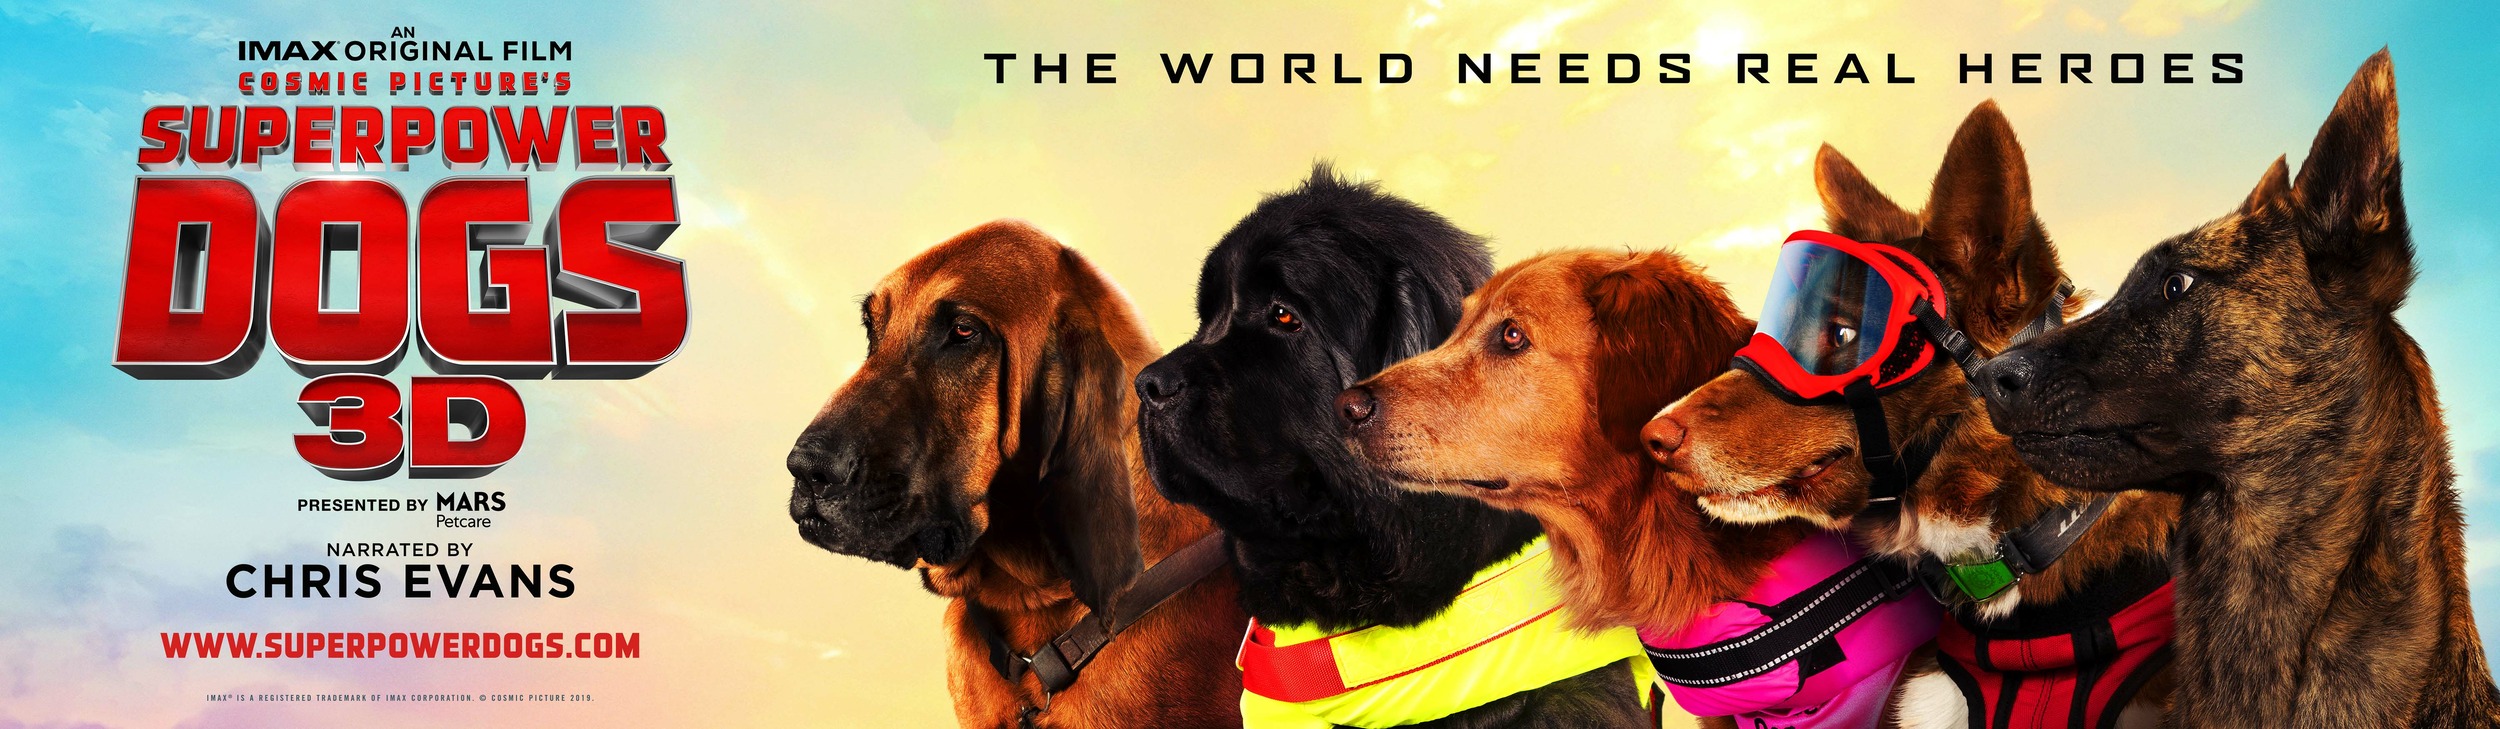 Mega Sized Movie Poster Image for Superpower Dogs (#2 of 7)